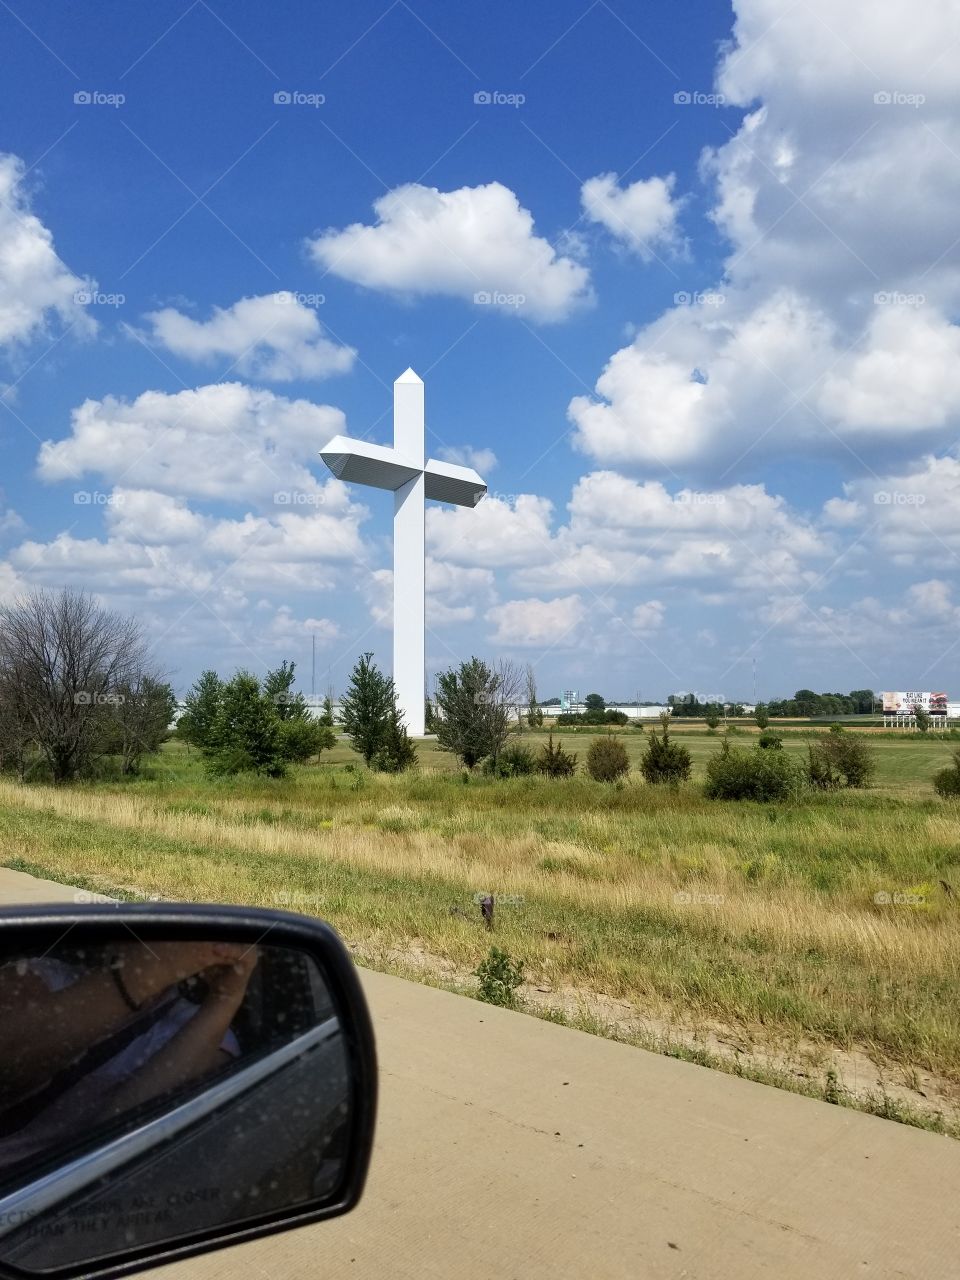 Cross in the clouds